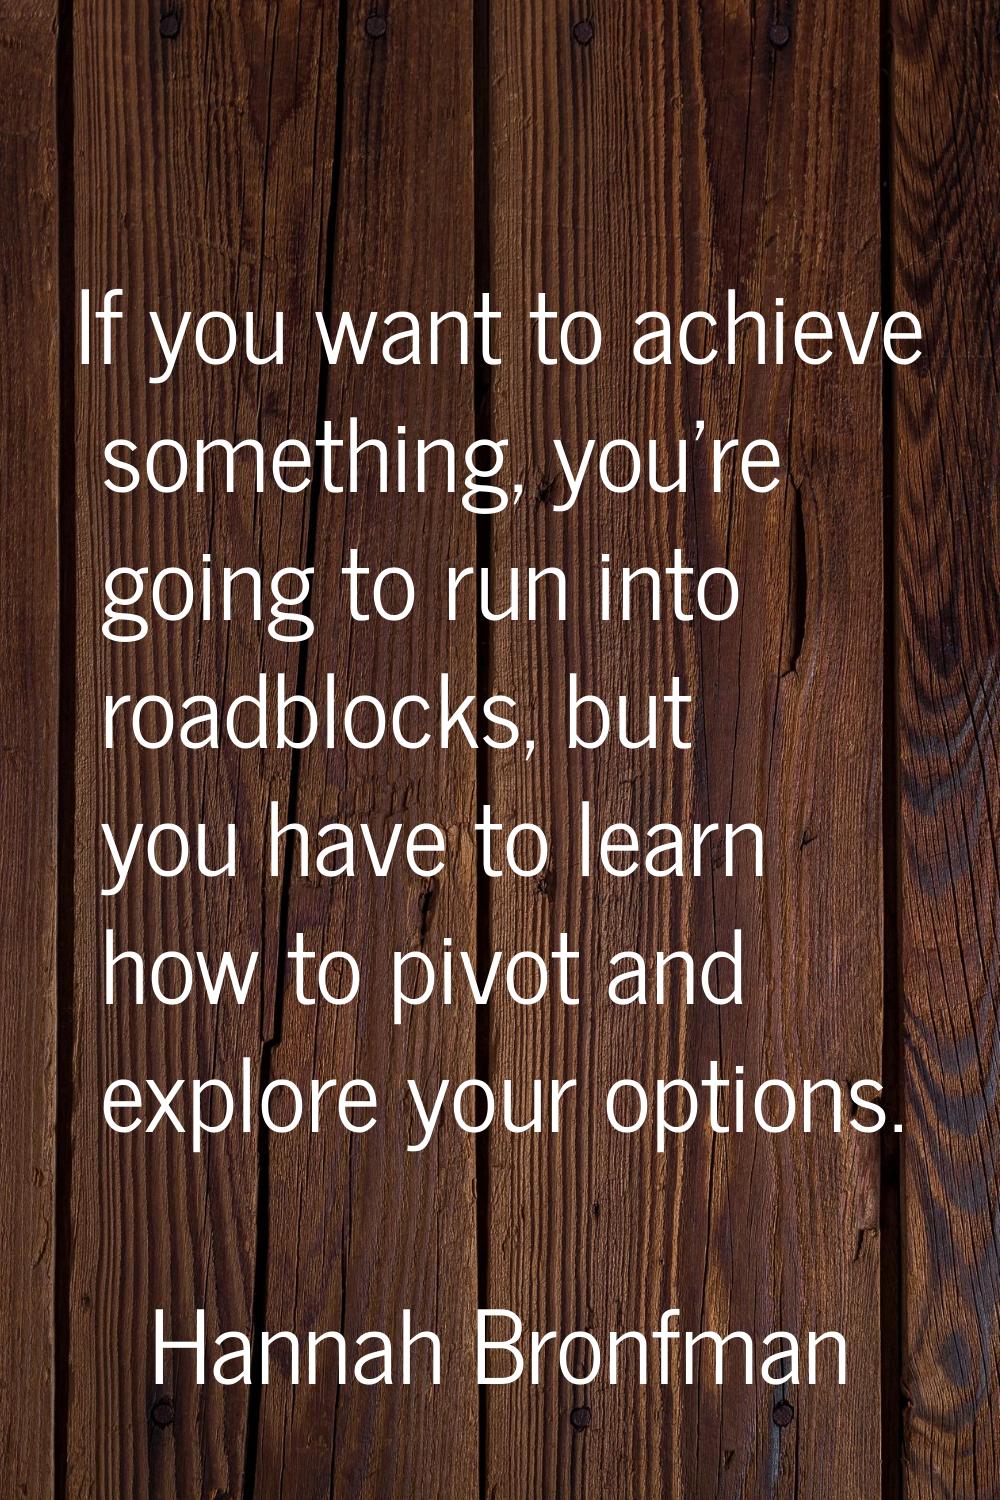 If you want to achieve something, you're going to run into roadblocks, but you have to learn how to